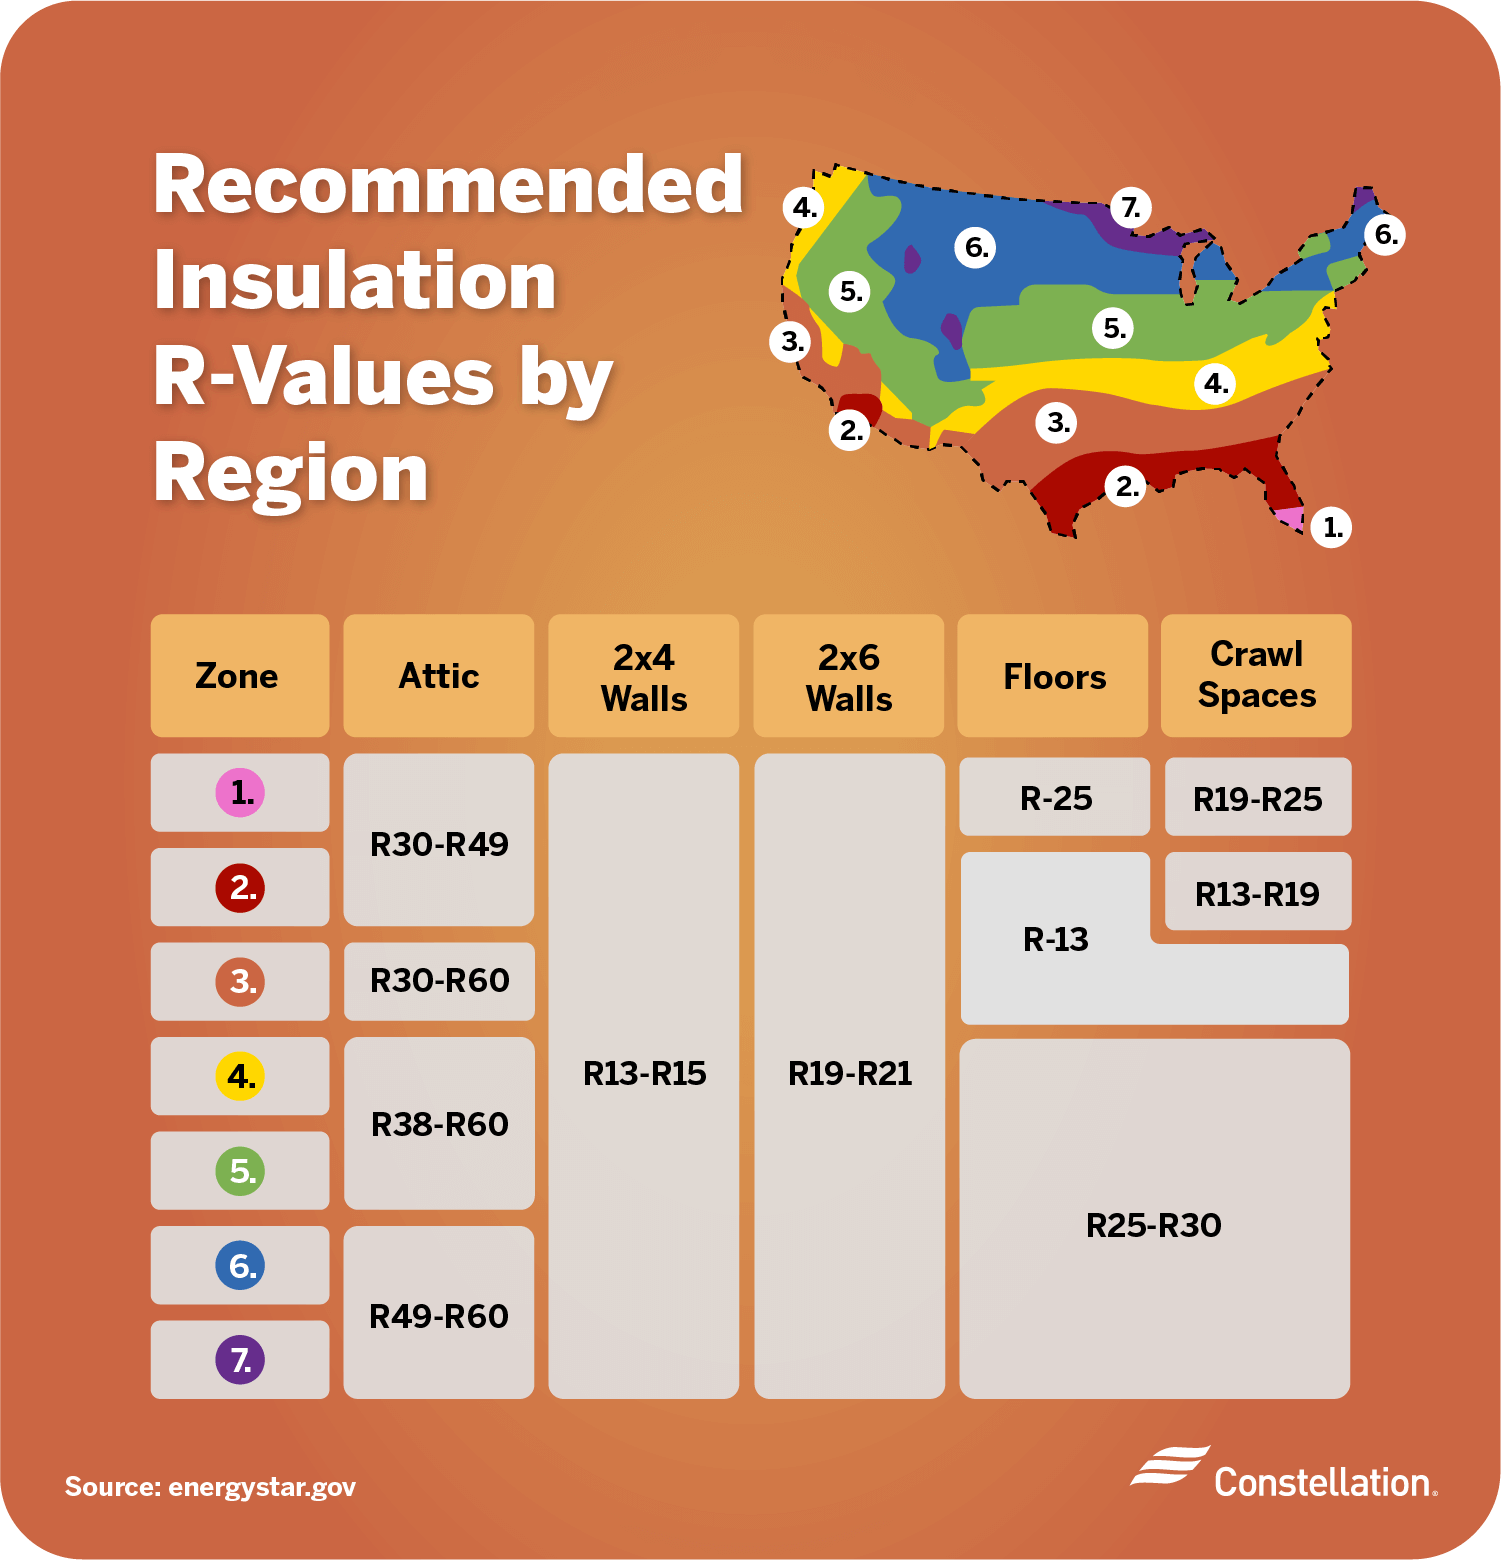 Recommended insulation R-values by region to consider when picking insulation for your home.